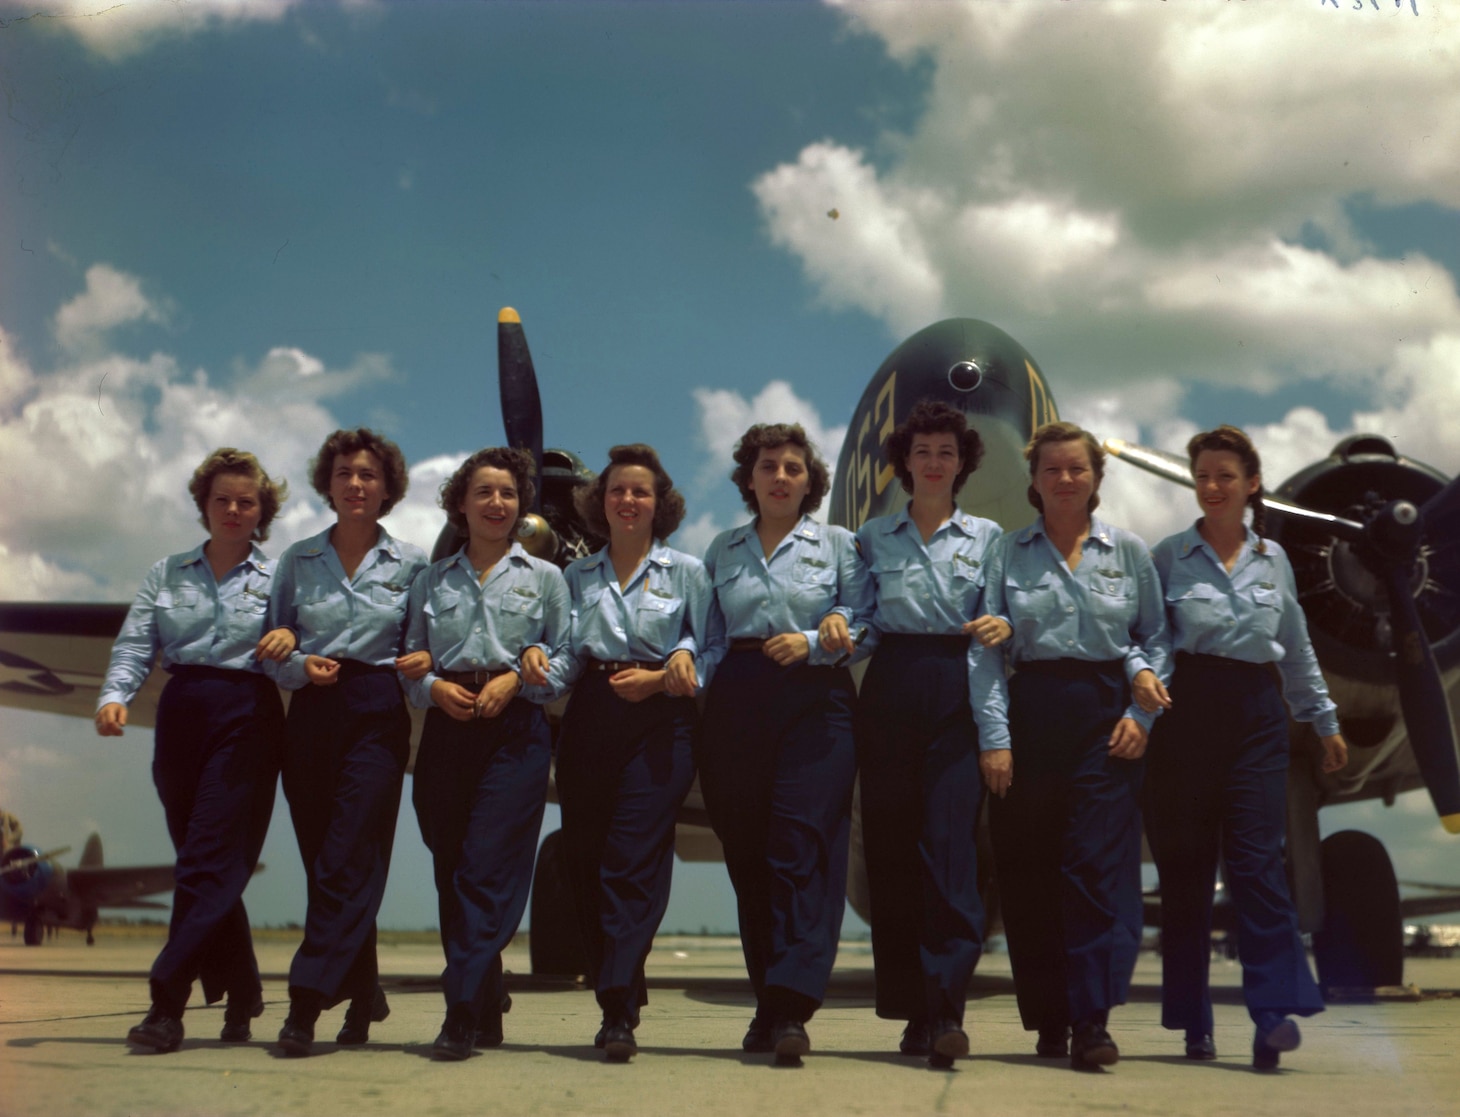 Eight WASPs photographed along the ramp at the Army Air Force Training Command’s Advanced single engine pilot school at Foster Field, Victoria, Texas. Left to right: Pauline S. Cutler (Cleveland, OH); Dorothy Ehrhardt (Bridgewater, MA); Jennie M. Hill (Harvey, IL); Etta Mae Hollinger (Paola, KS); Lucille R. Cary (Joliet, IL); Jane B. Shirley (Brownfield, TX); Dorothy H. Beard (Sacramento, CA); and Kathryn L. Boyd (Weatherford, TX). Image courtesy National Archives and Records Administration (342-C-K3616).